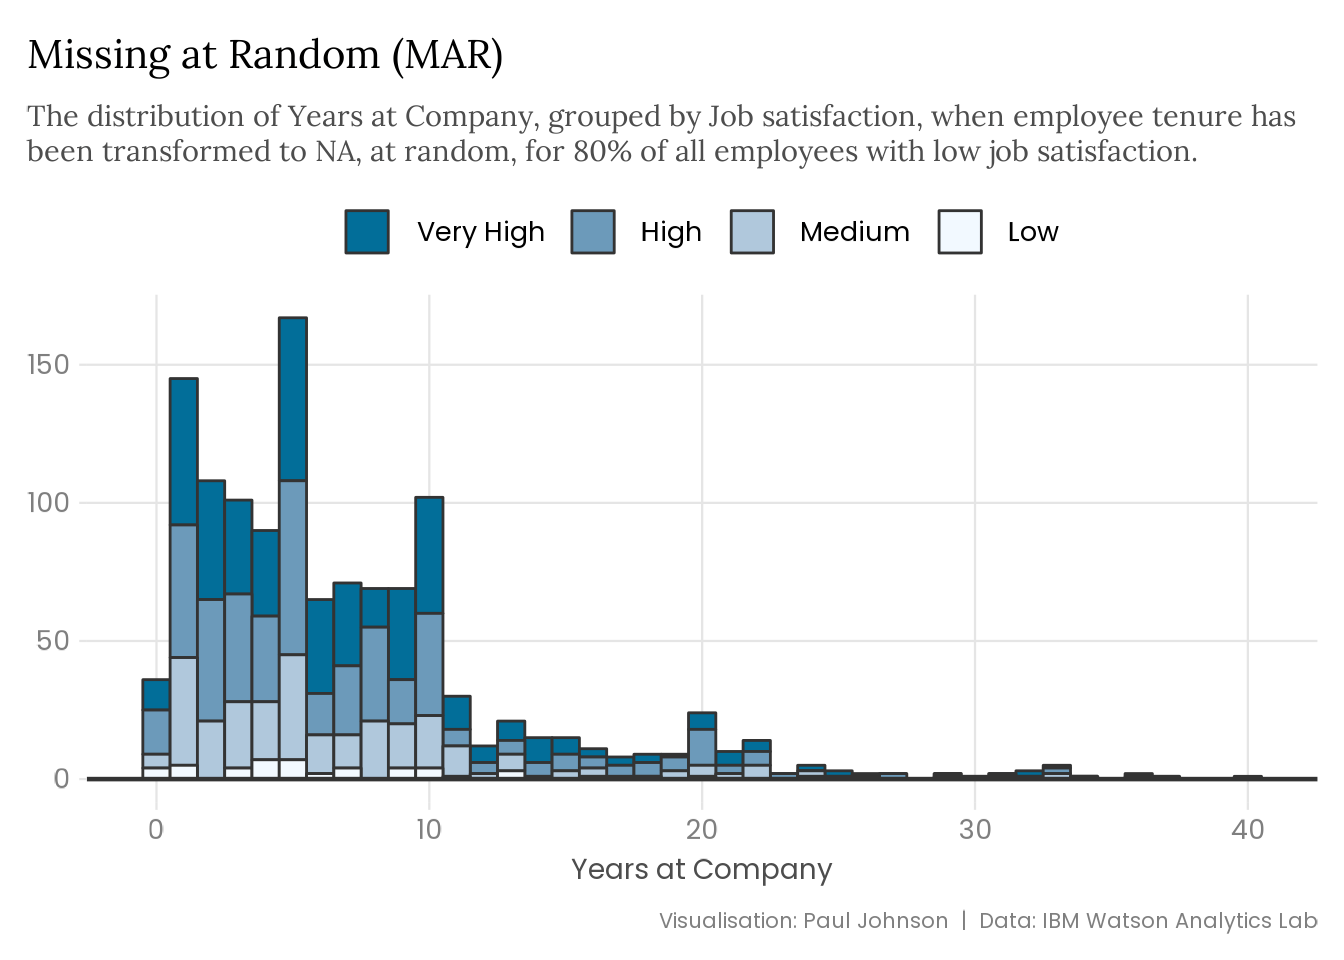 A histogram visualising the distribution of the total years that employees have worked at their company, conditional on their job satisfaction, with MAR data. The shape of the distribution is similar to the original data distribution, but the share of employees with low job satisfaction is significantly lower across the whole distribution. 